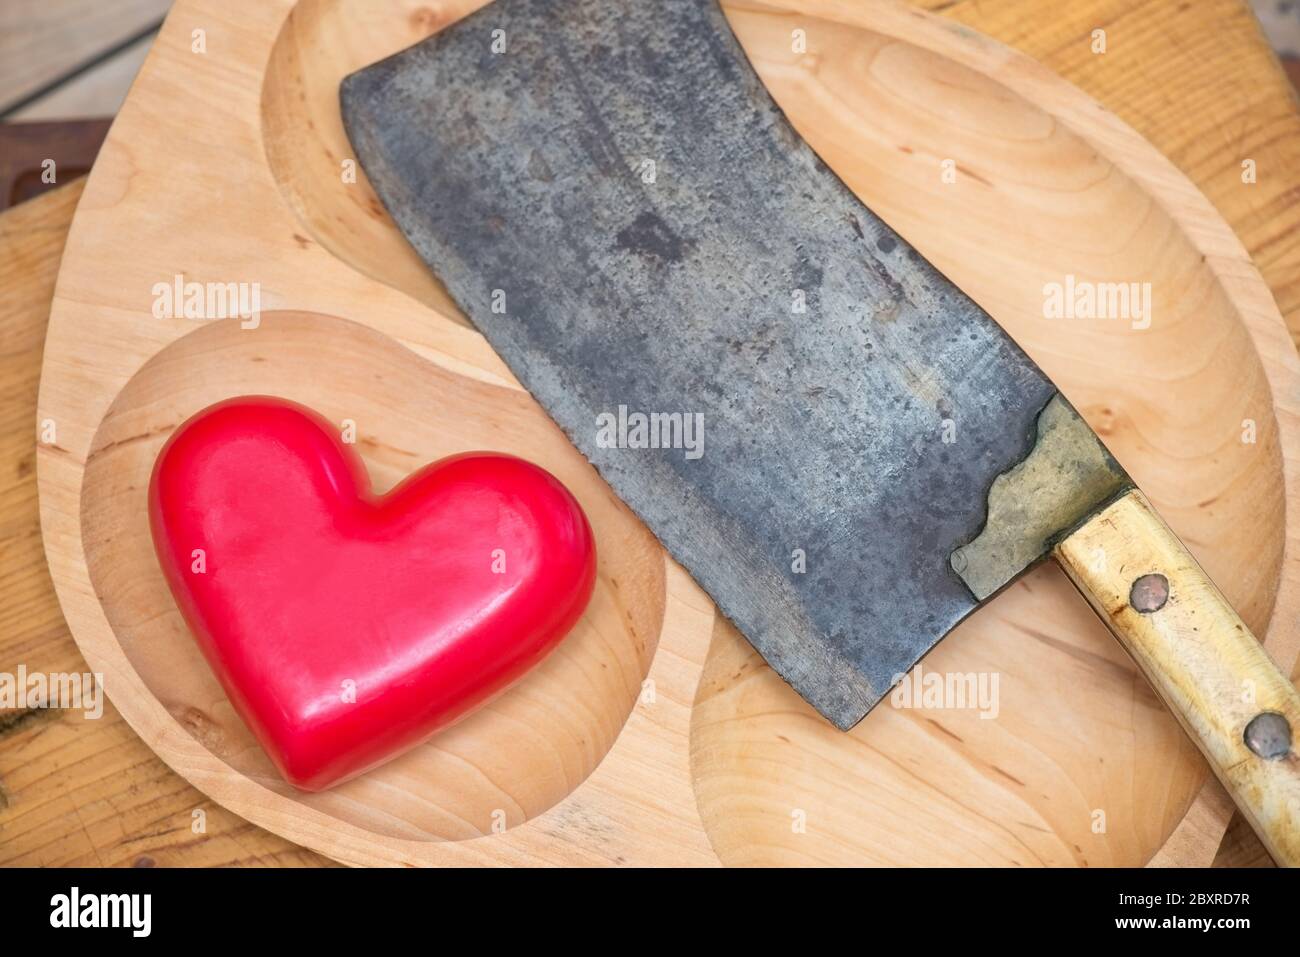 Meat cleaver and heart on a wooden board Stock Photo